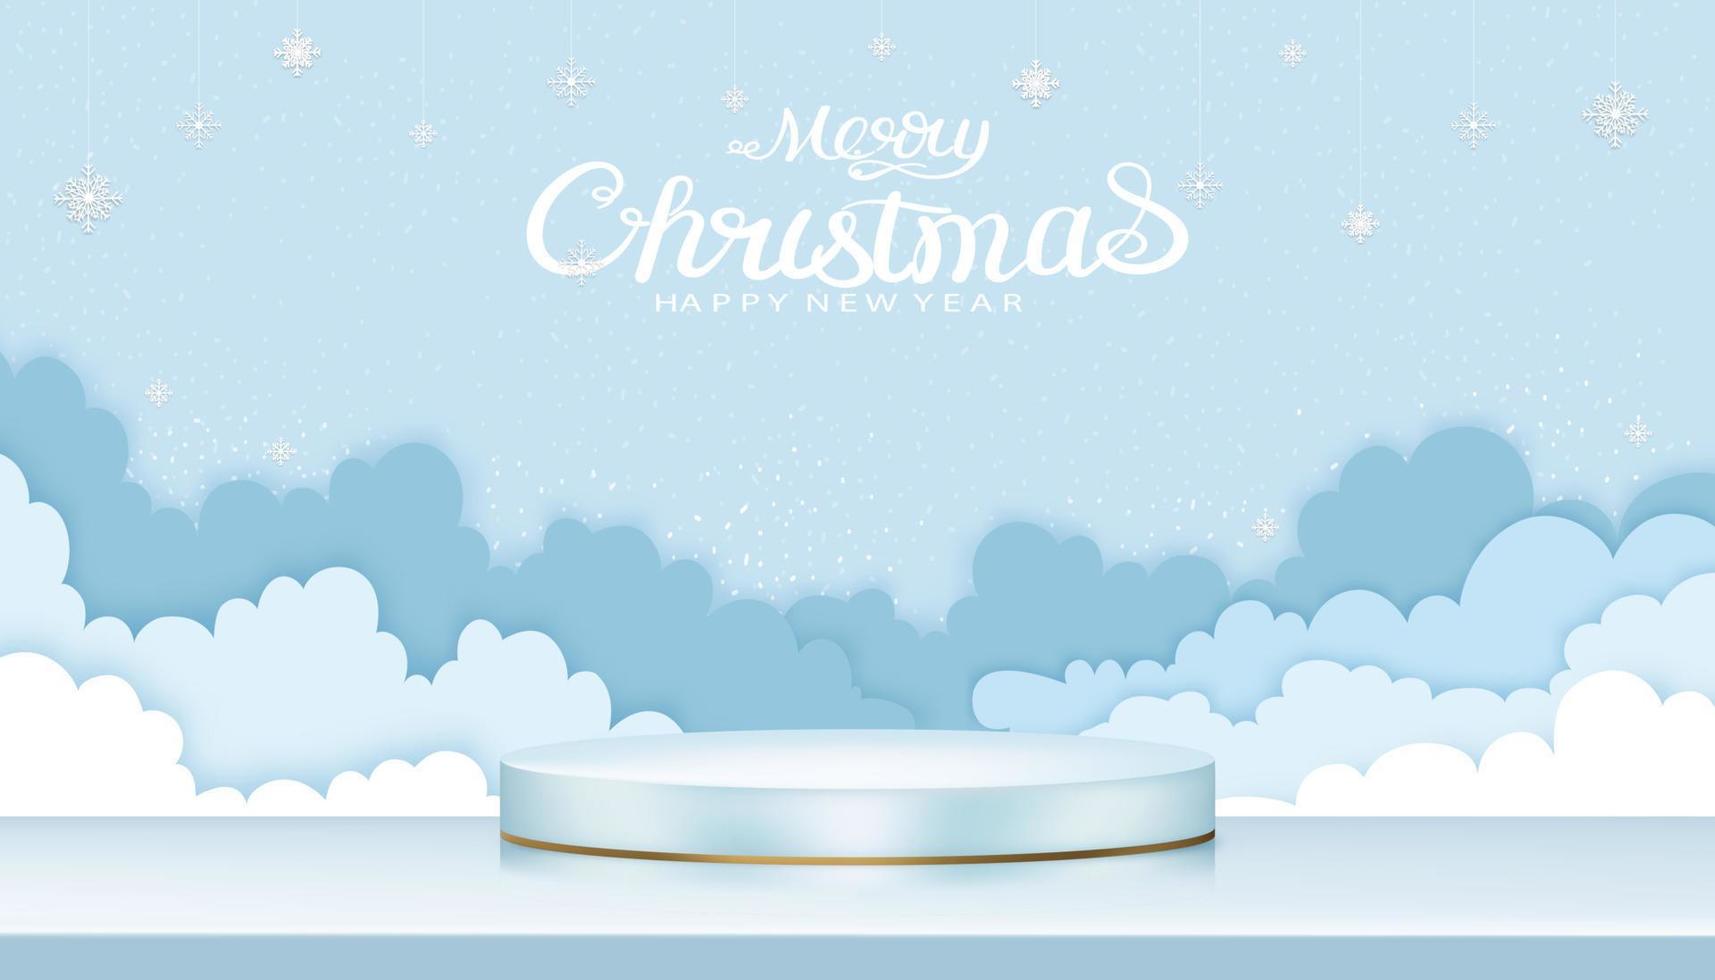 Merry Christmas background with 3D display cylinder shape and paper cut cloudscape with snowflakes decoration on blue sky, Vector illustration for Christmas or New Year banner or Greeting card